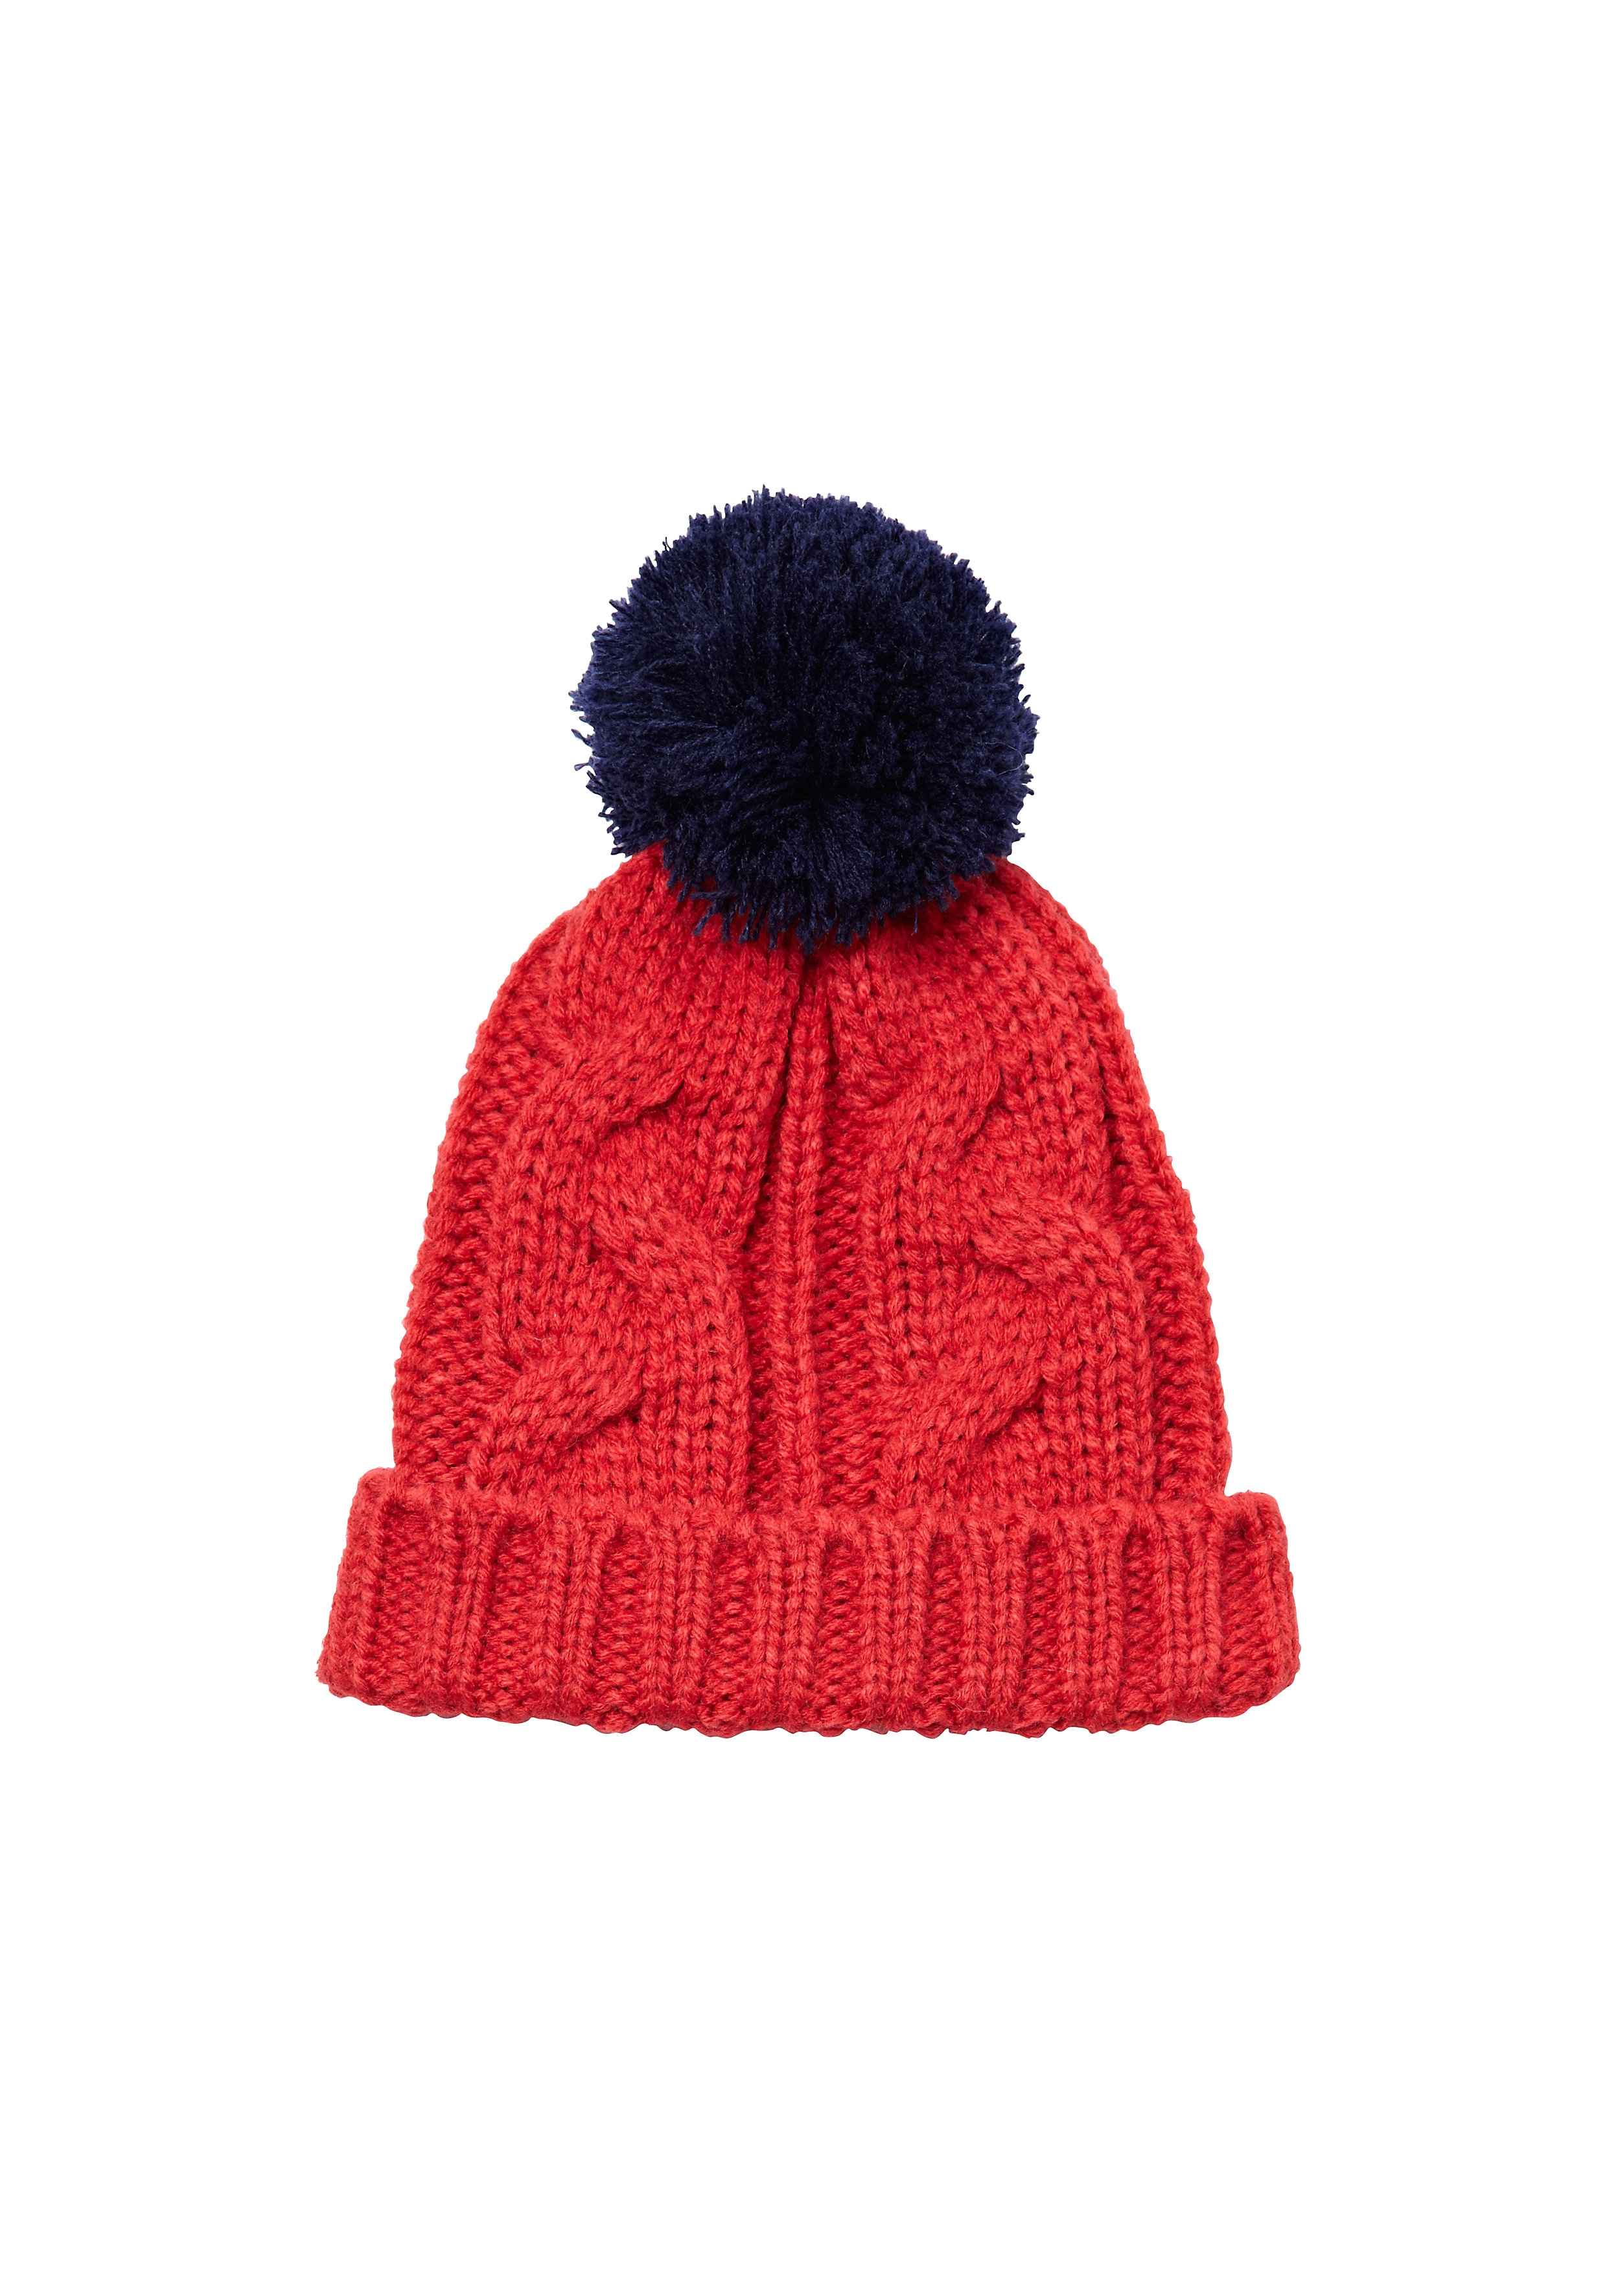 Mothercare | Boys Bobble Hat - Red